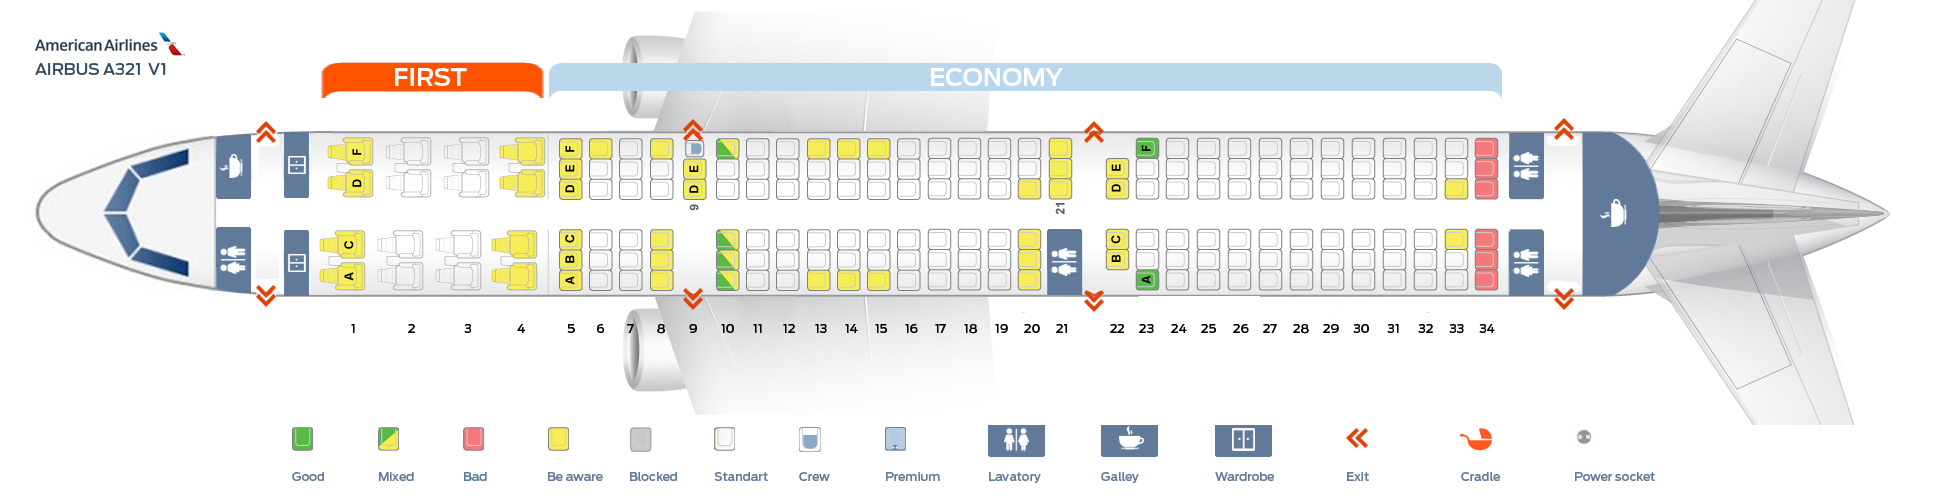 American Airlines Airbus Seating Chart